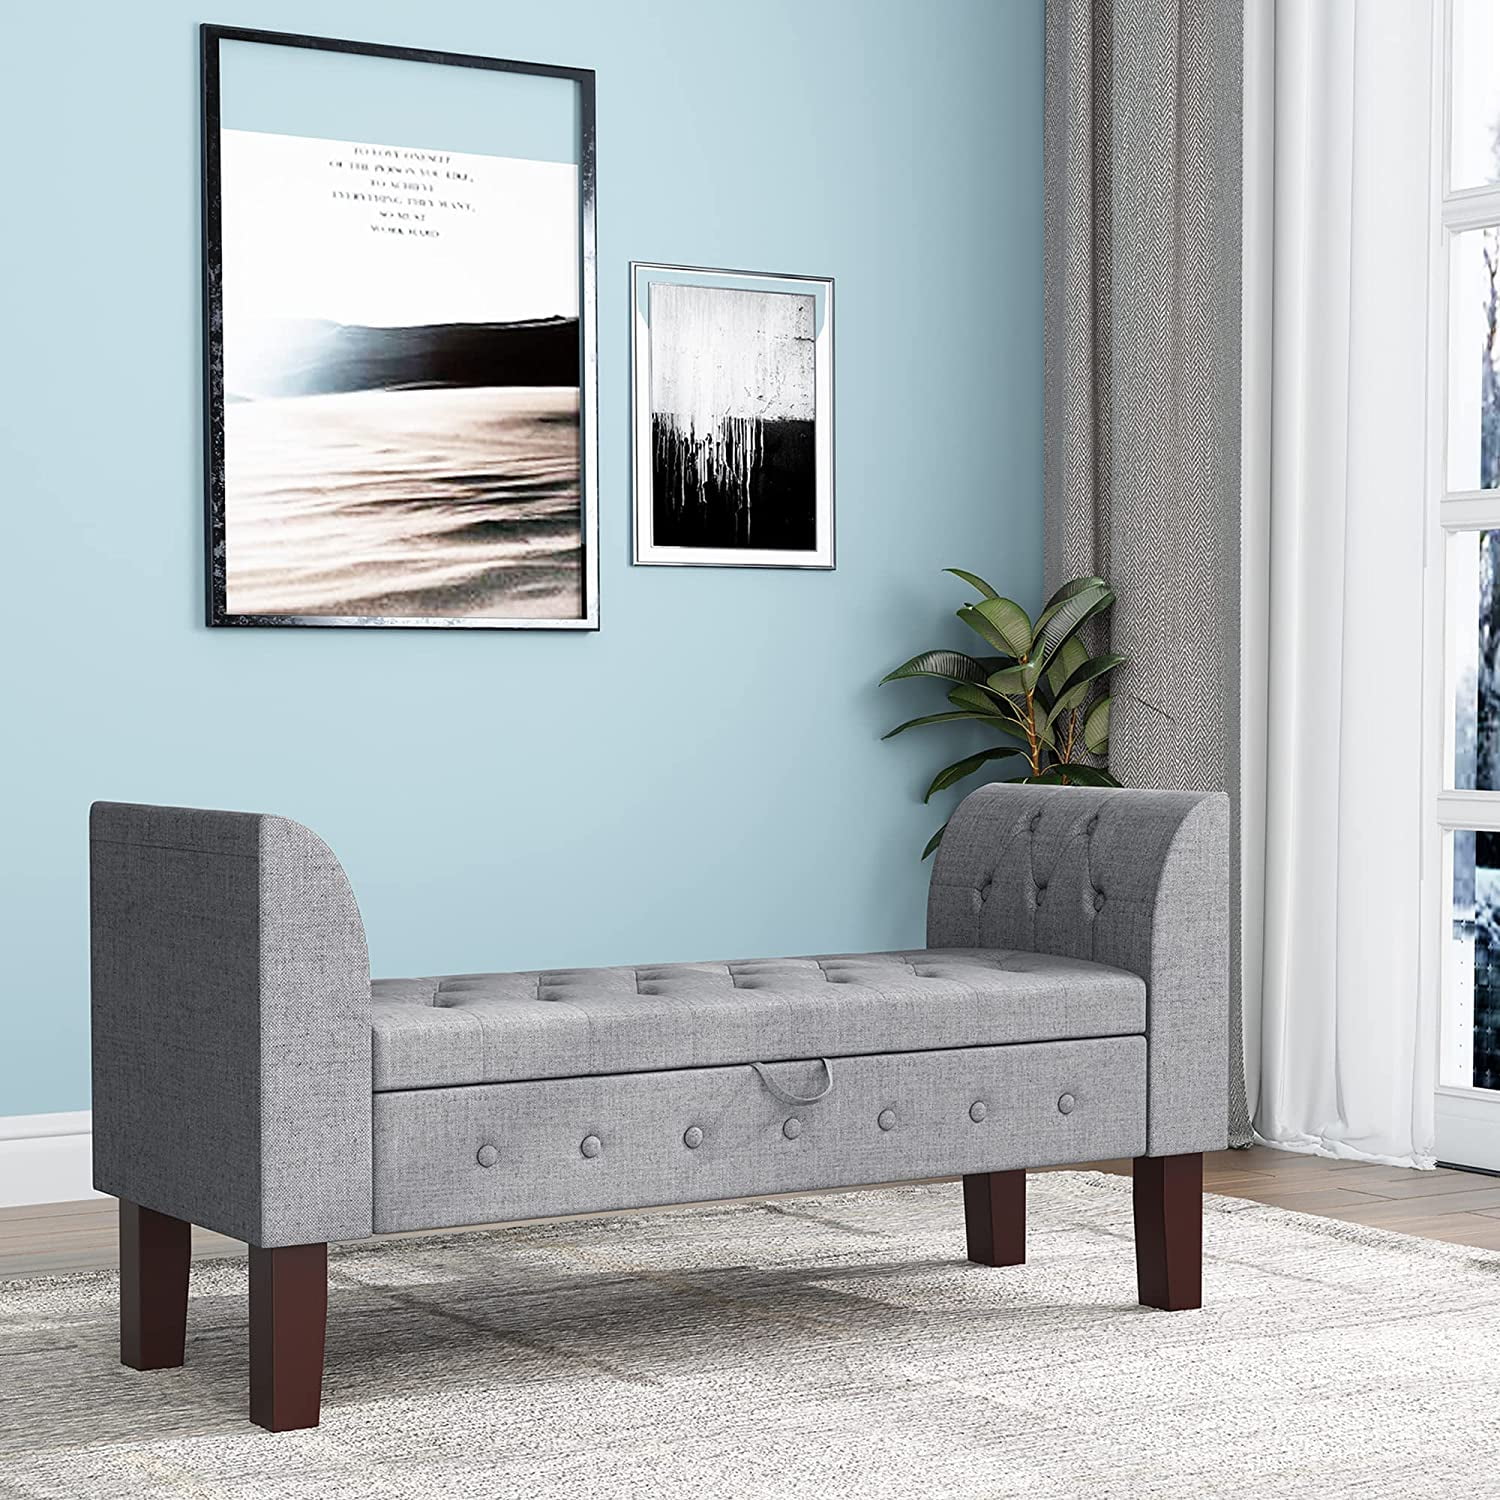 Entryway Khaki Living Upholstered Ottoman Andeworld Bench Arms for with Bench Room Bedroom Storage